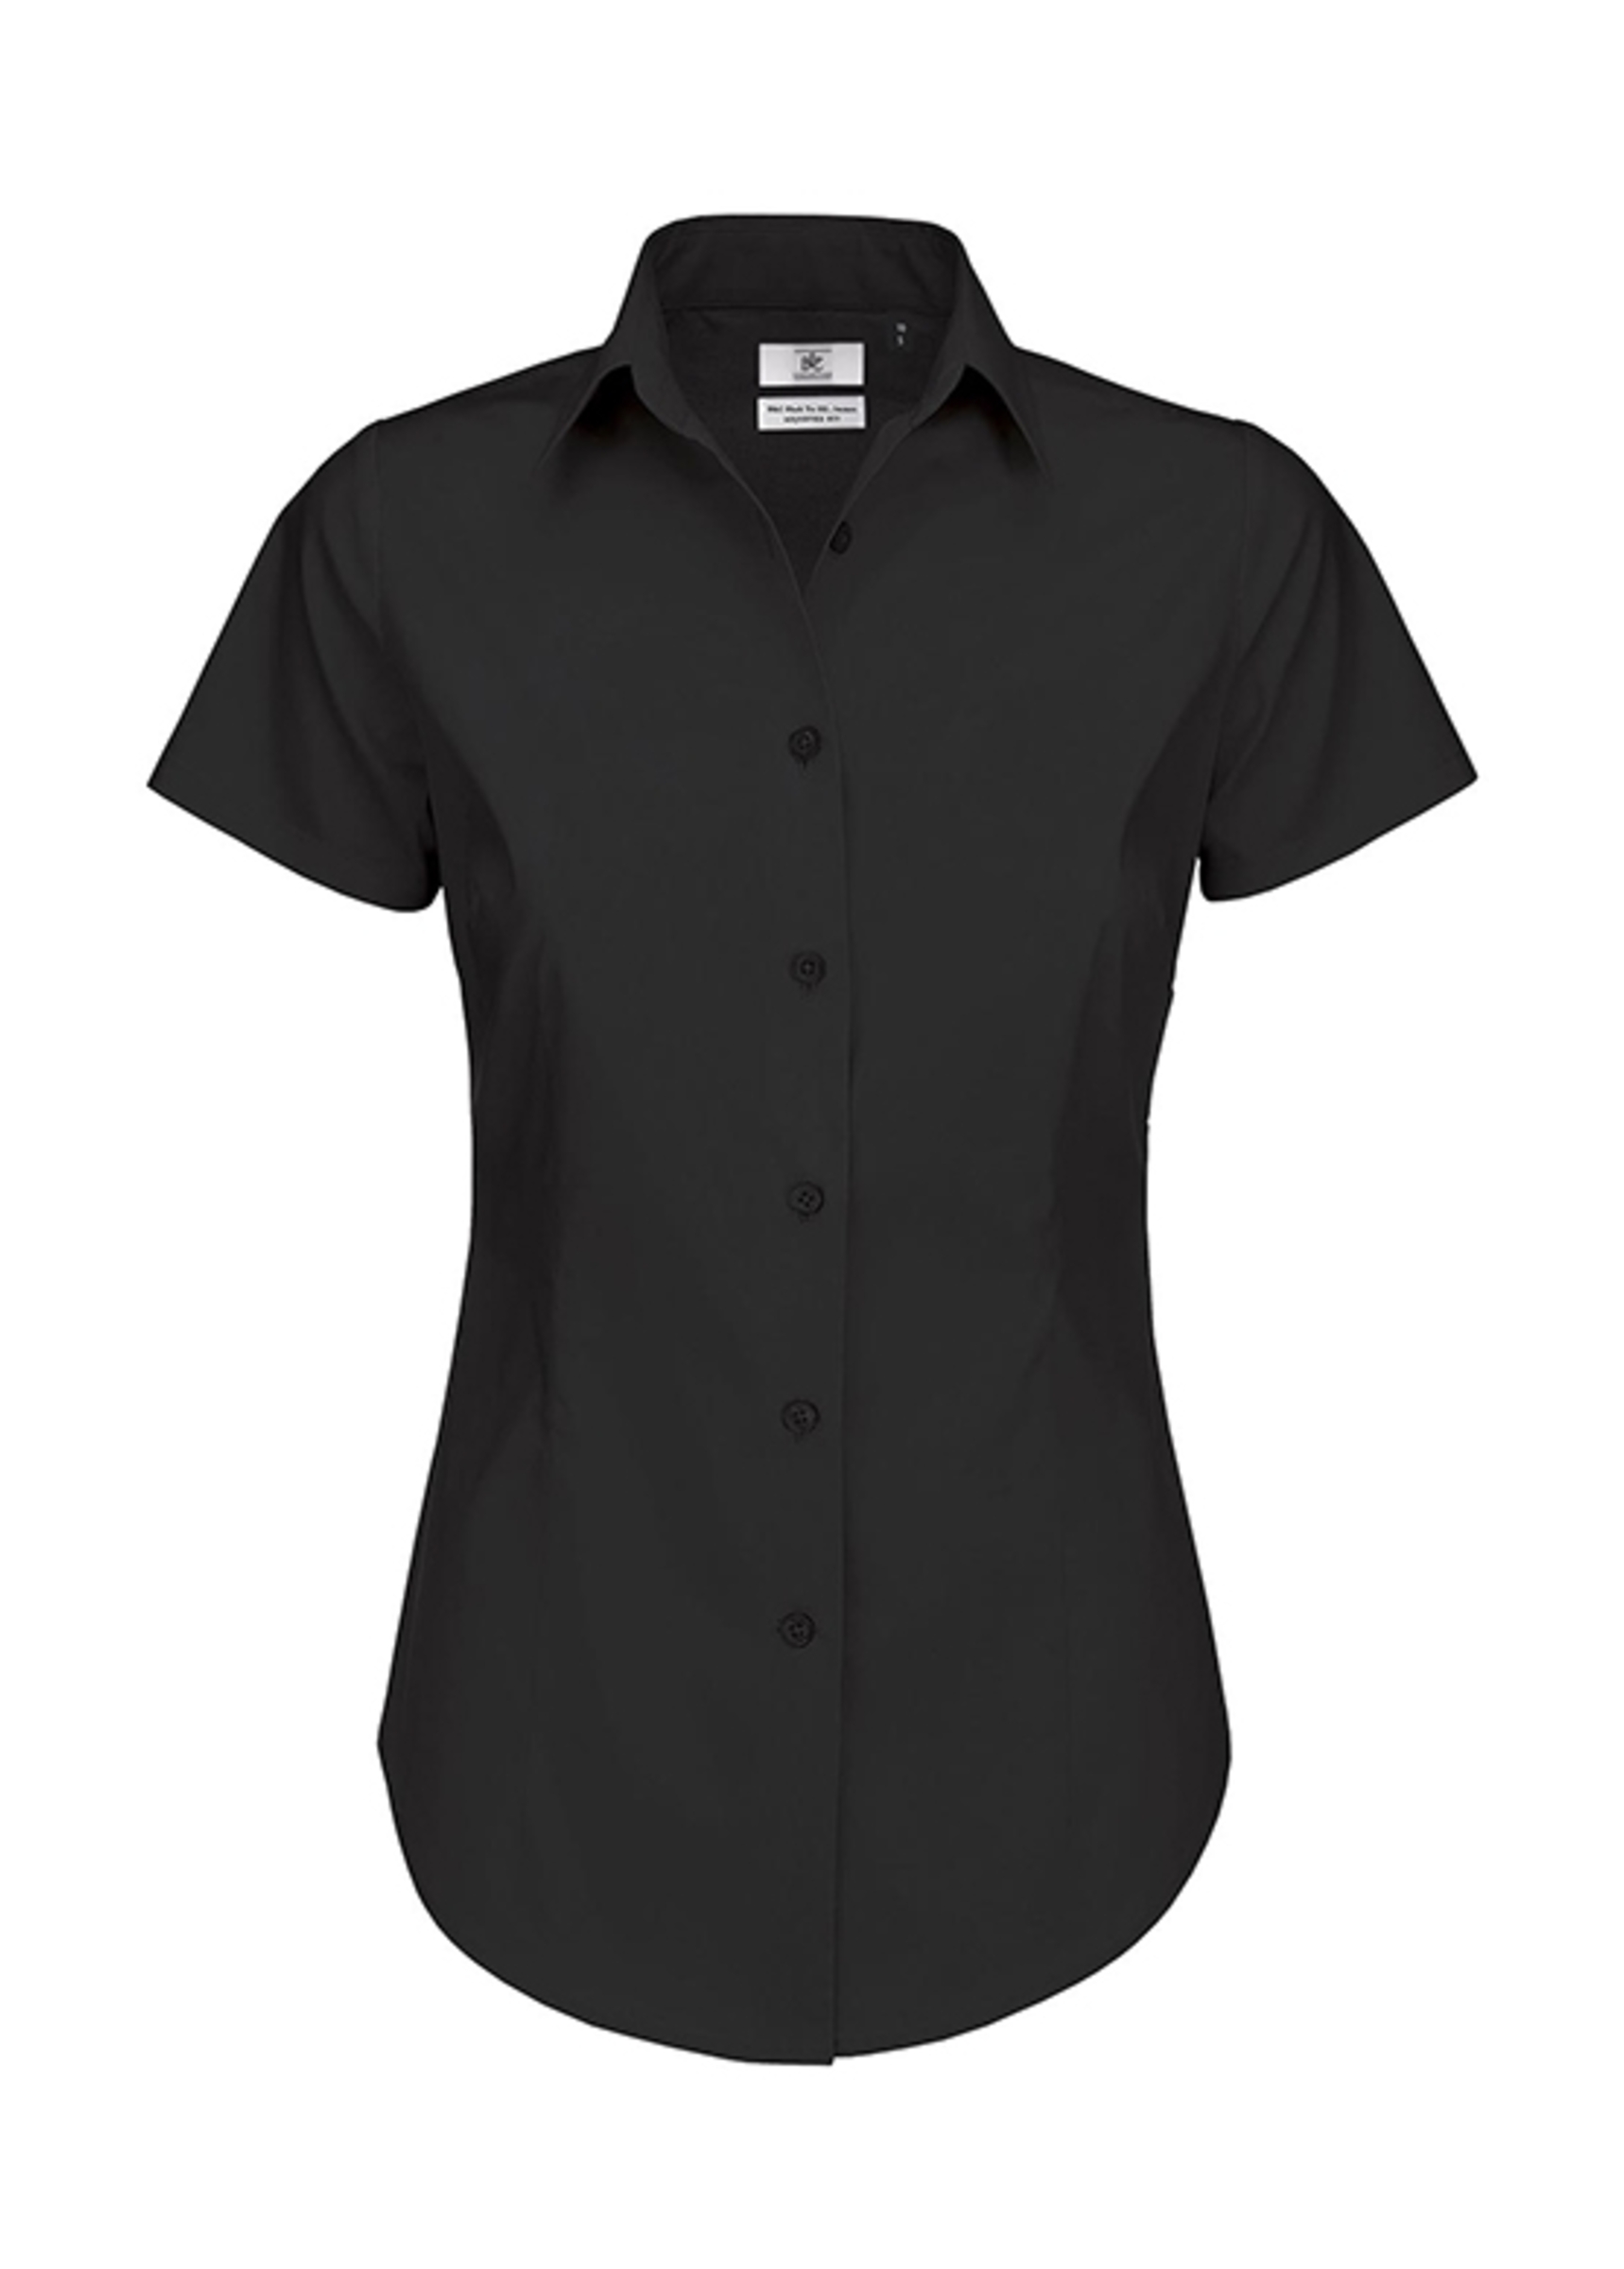 B And C Collection Black Tie Ladies Short Sleeve Shirt